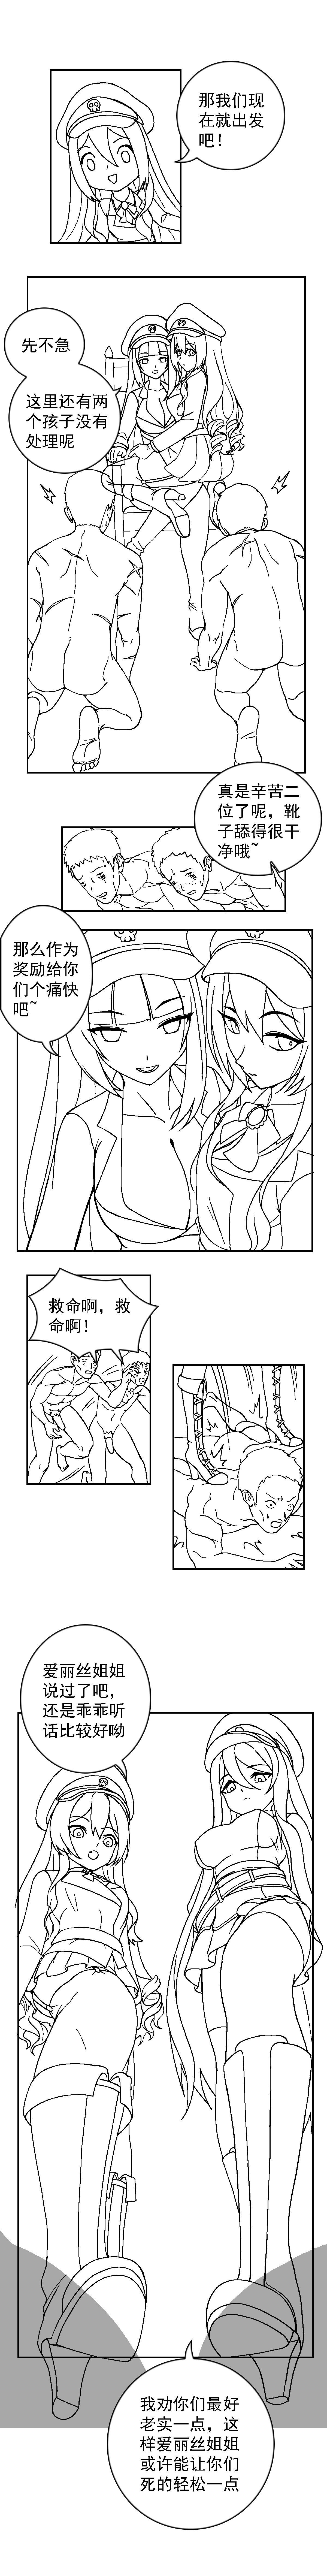 Animation [Weixiefashi] The Cruel Empire Executioners black-and-white [帝国处刑官爱丽丝2：残酷的处刑天使][黑白] Shy - Page 5